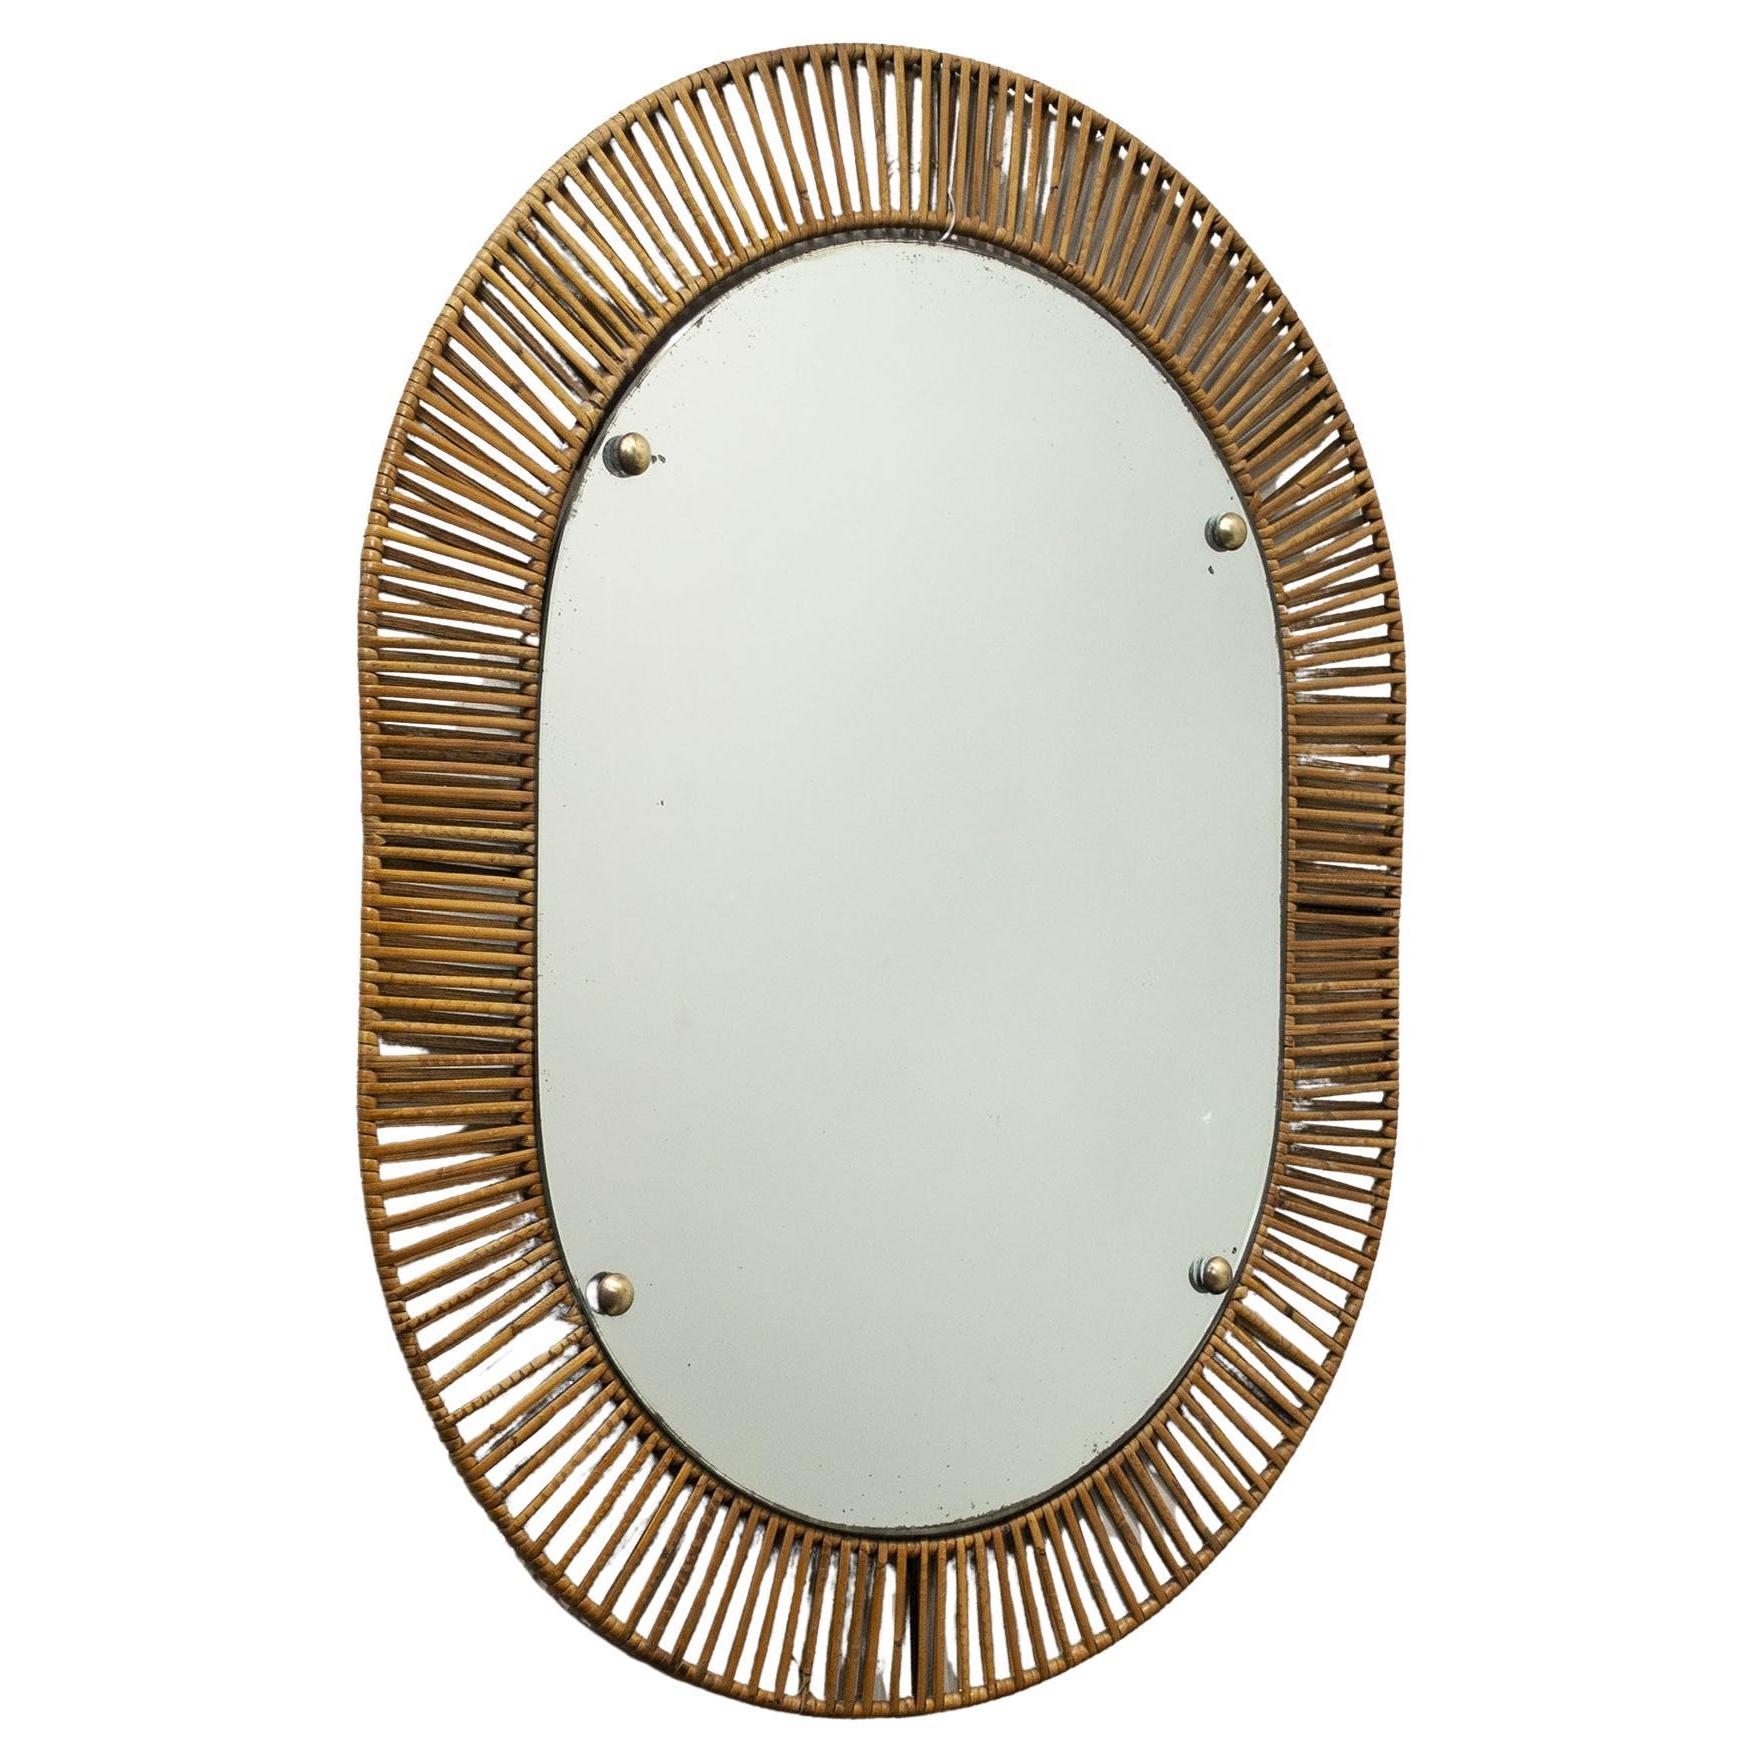 Refined bamboo mirror with wrought iron frame, Italian production in the late 1950s
Mirror measures W 46 H 64 cm.